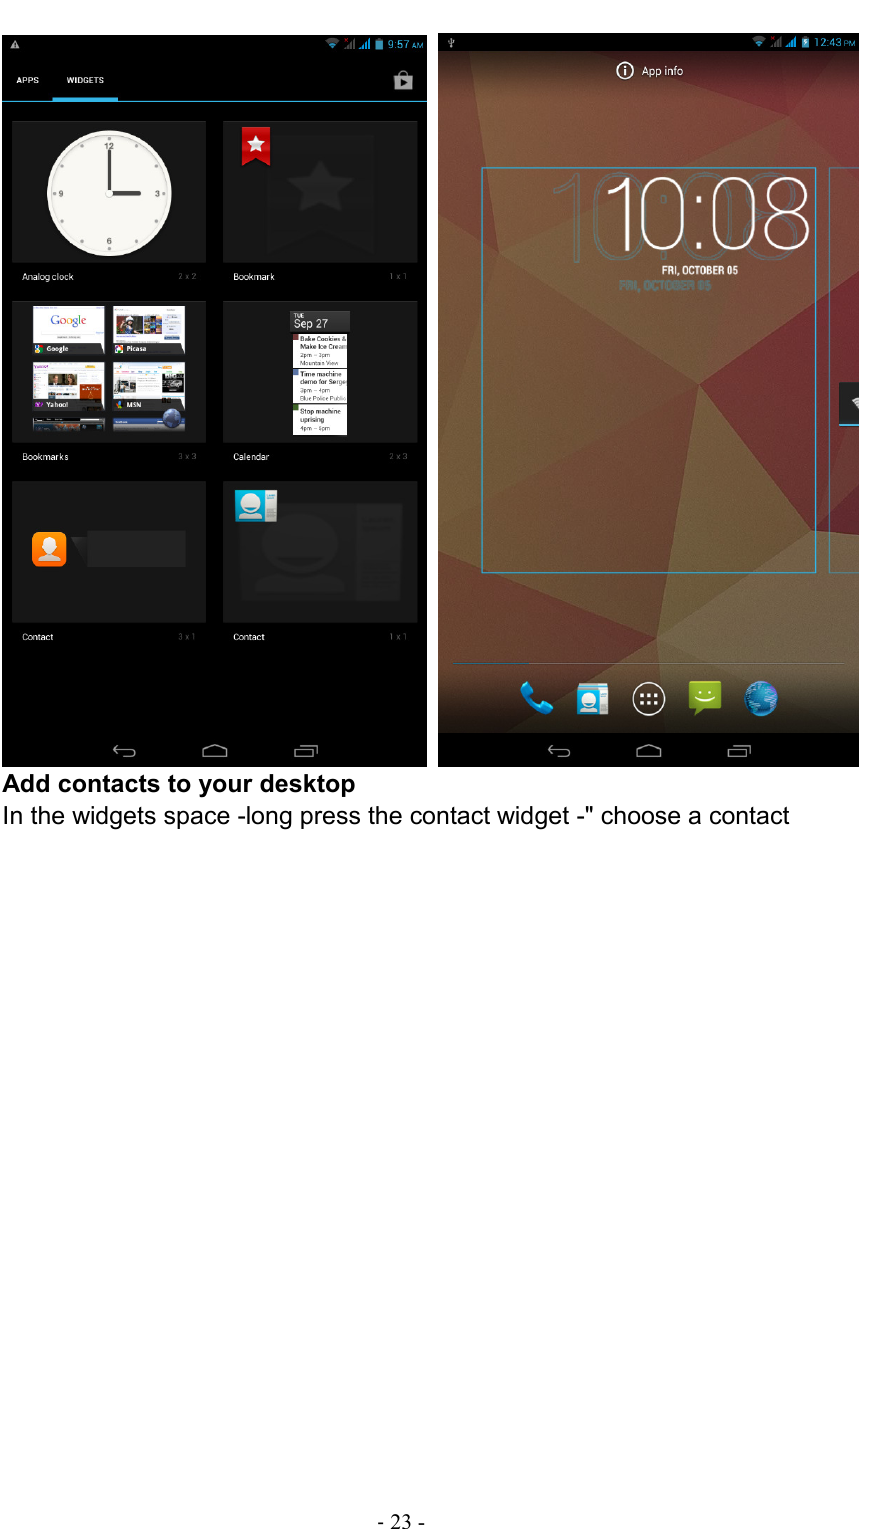                                                                                - 23 -    Add contacts to your desktop In the widgets space -long press the contact widget -&quot; choose a contact 